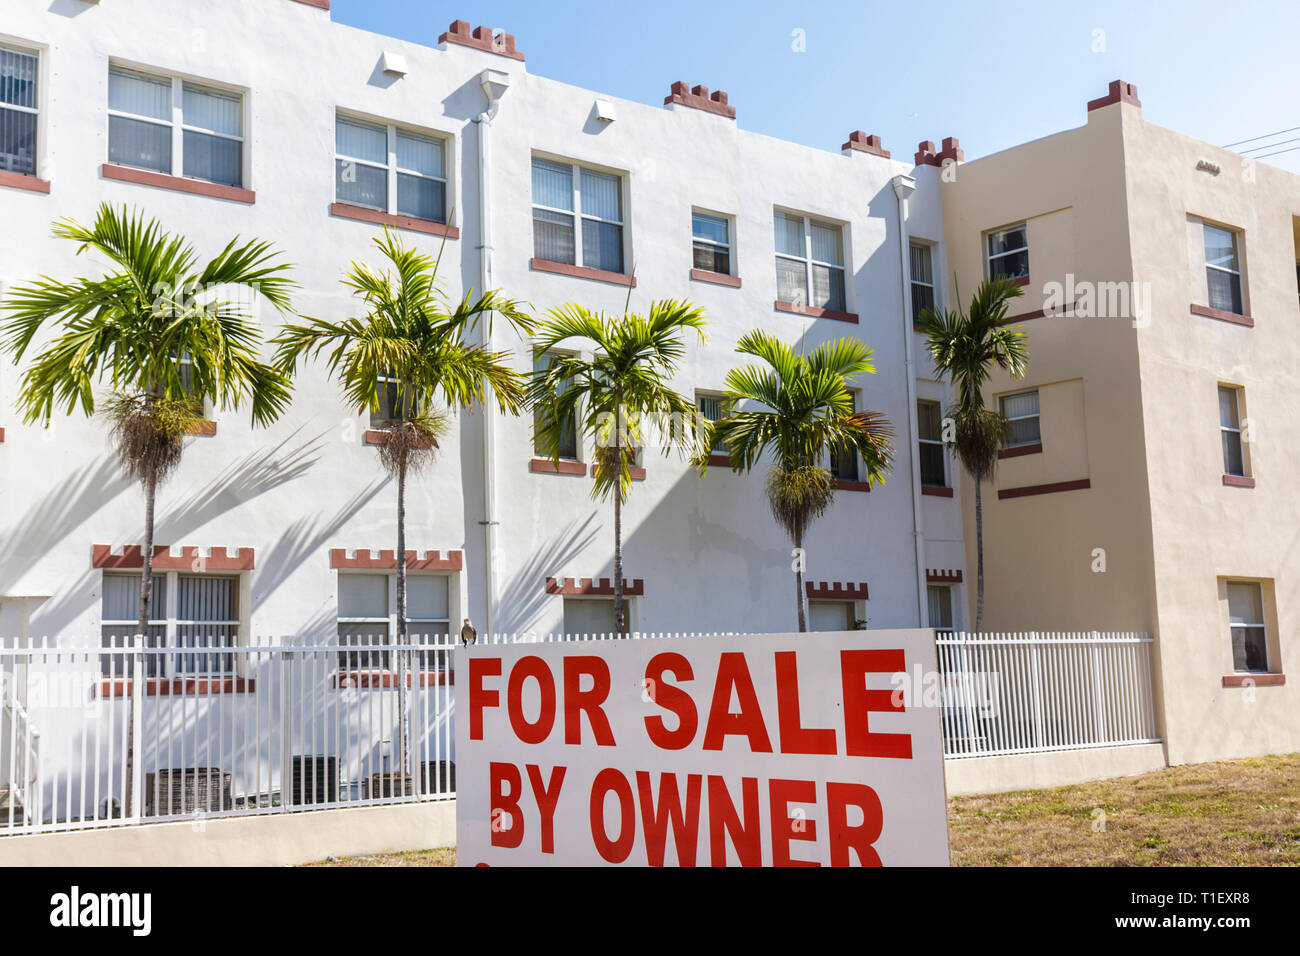 Miami Beach Florida,land,empty lot,development,sign,sell,for sale by owner,building,palm trees,FL090320011 Stock Photo